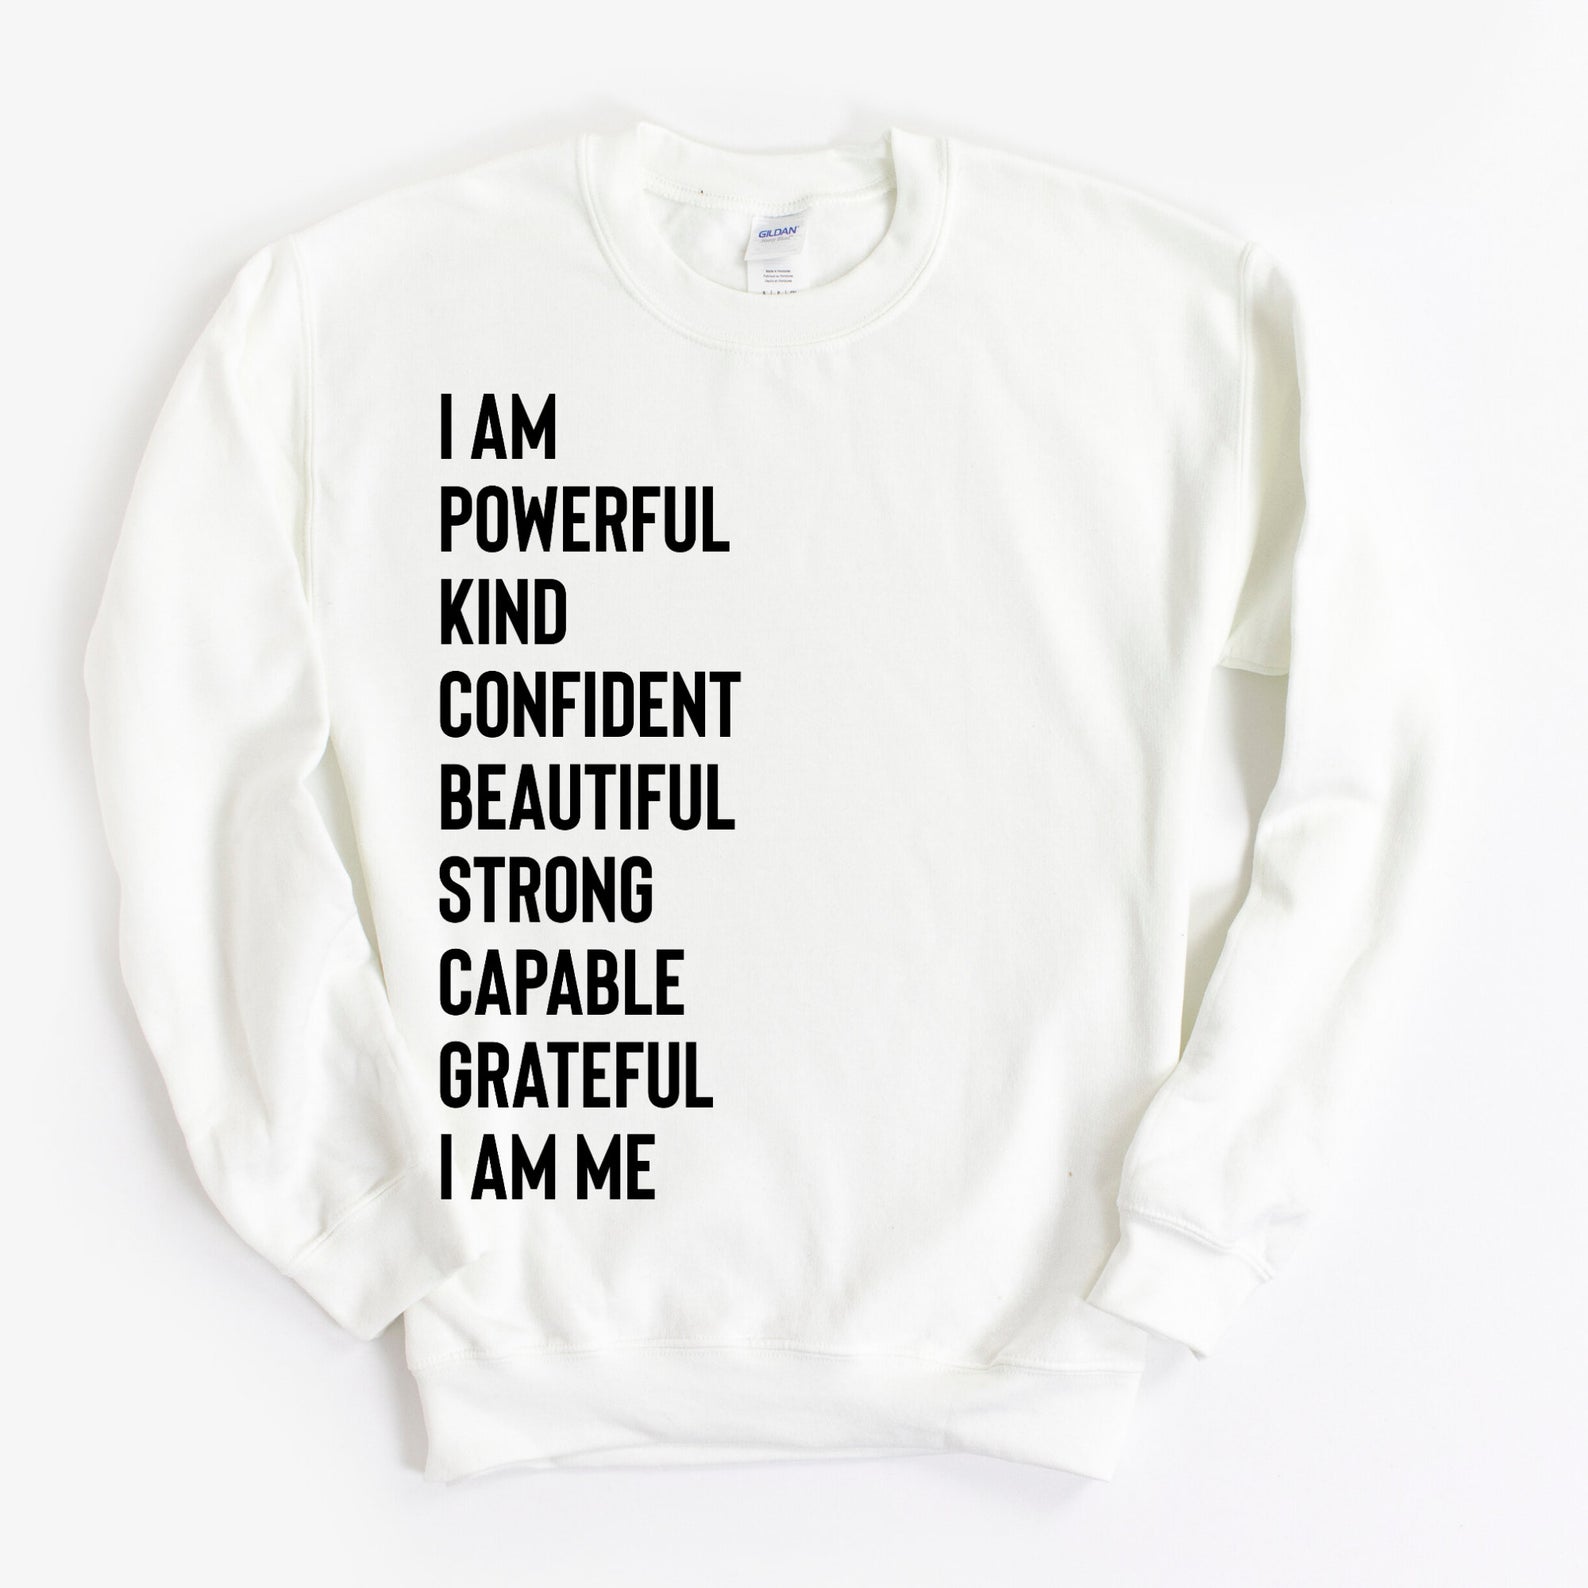 7 Fun And Affirmative Sweatshirts Sold On Etsy